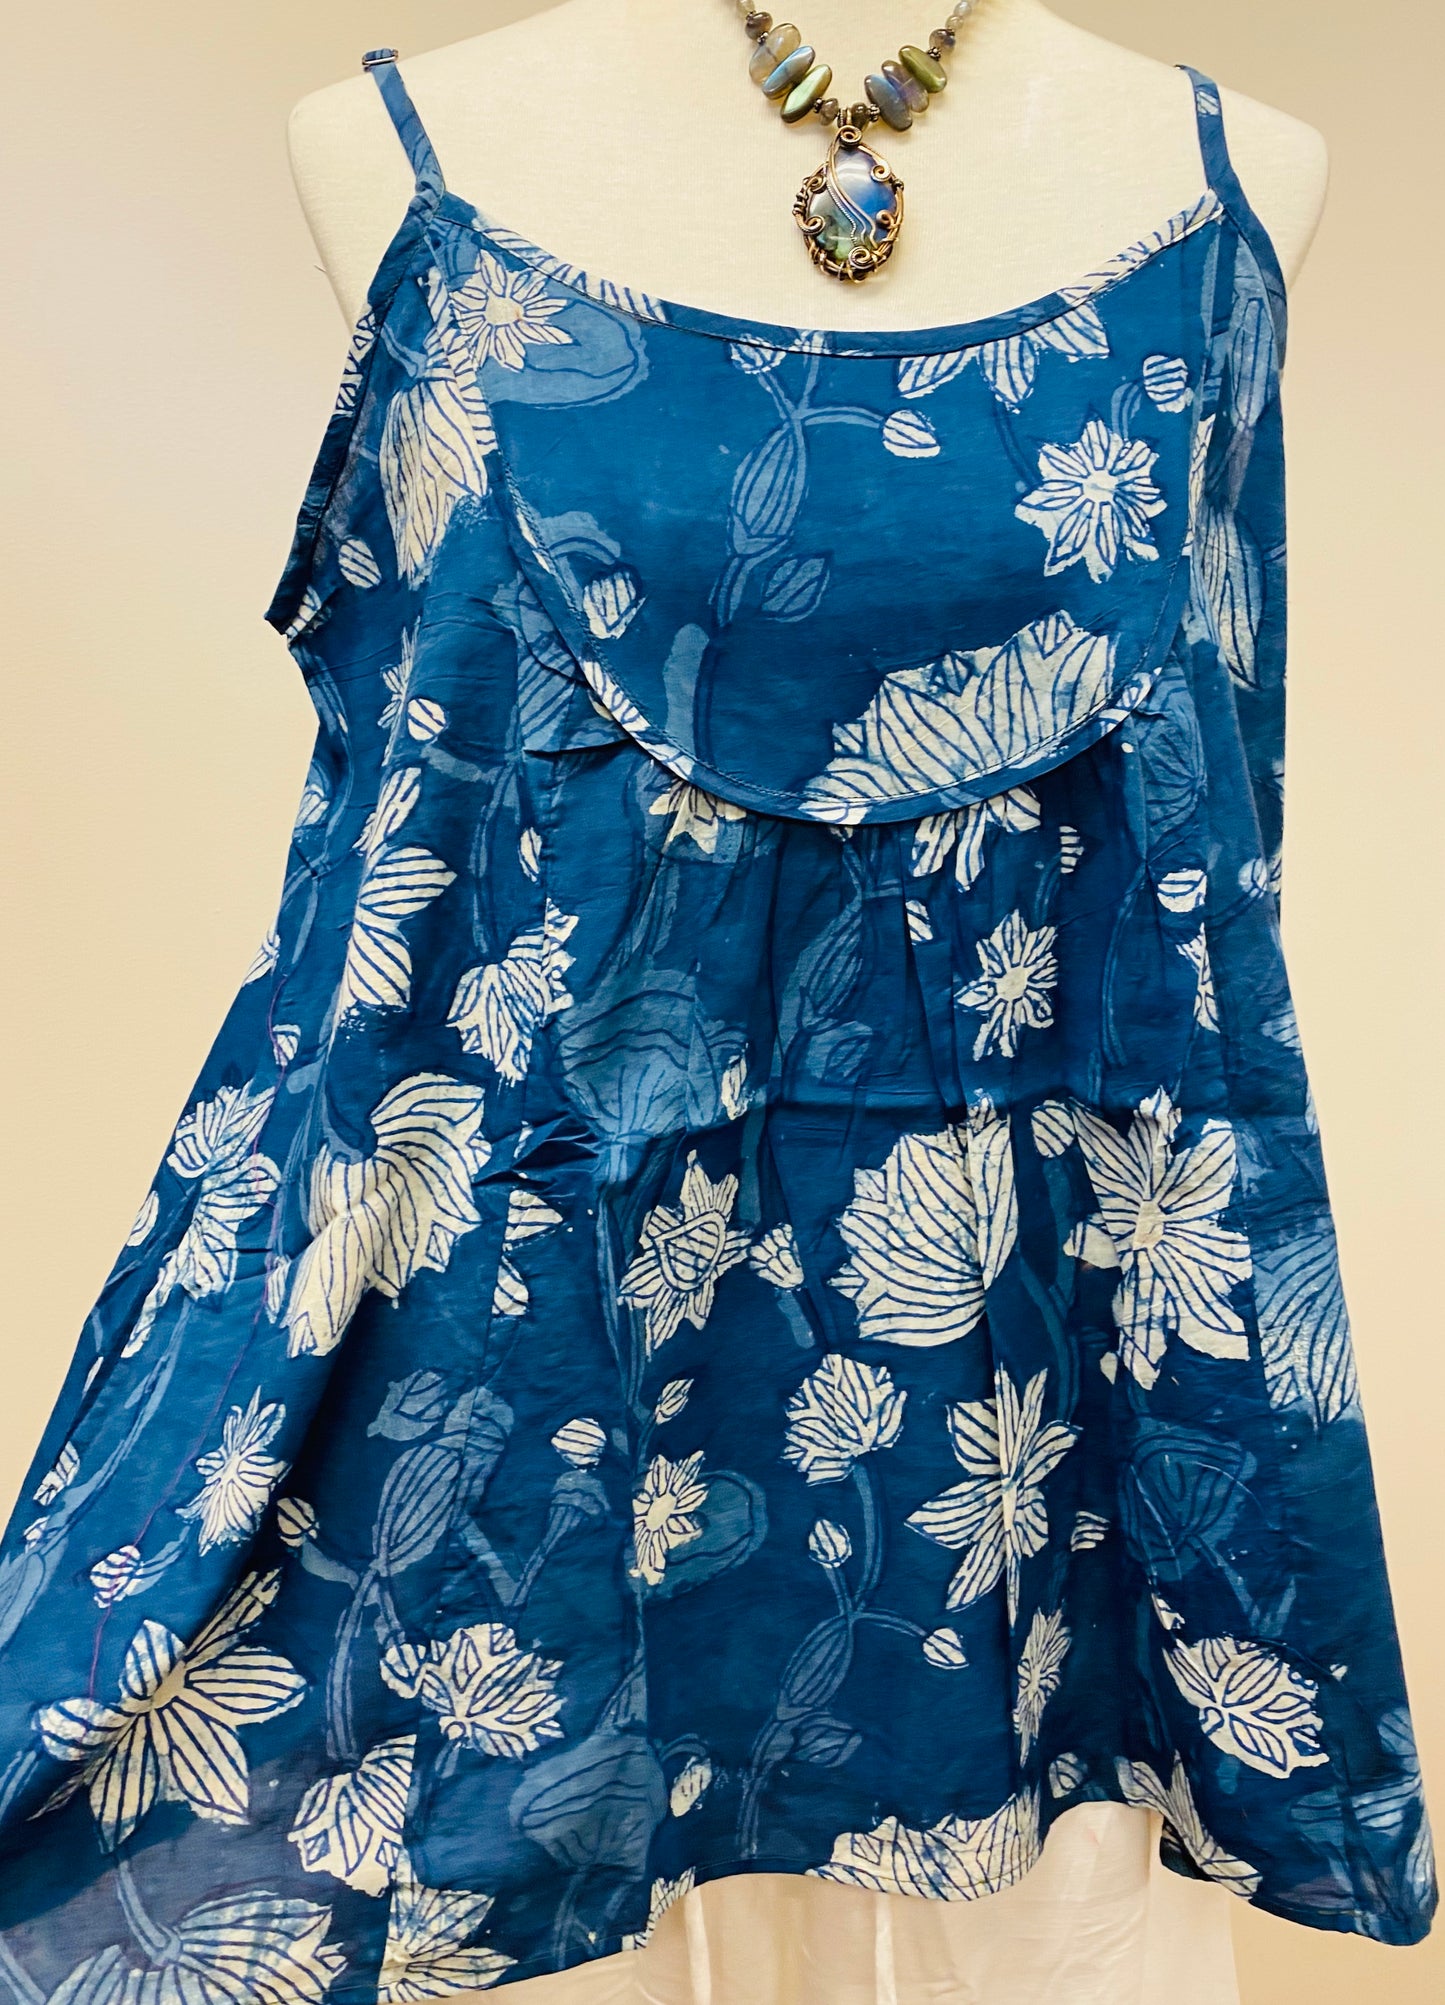 Hand Block Print Indigo Cotton Tank Top with pleated detail on top - 4 Patterns Available